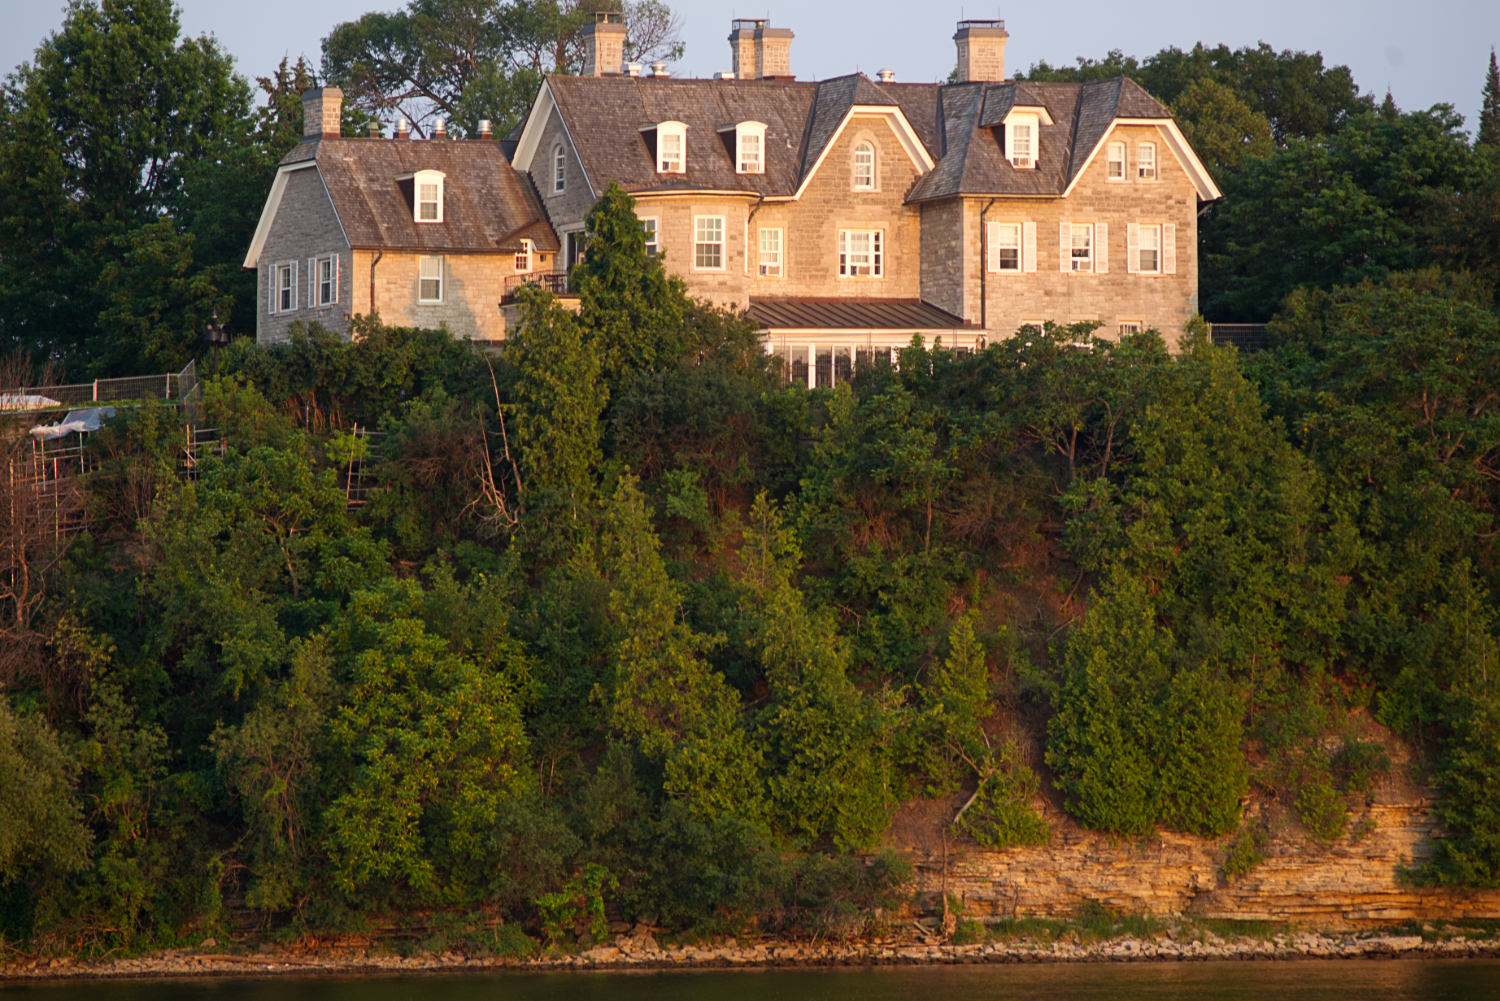 A sunlit limesone building sits atop a cliff above a river.